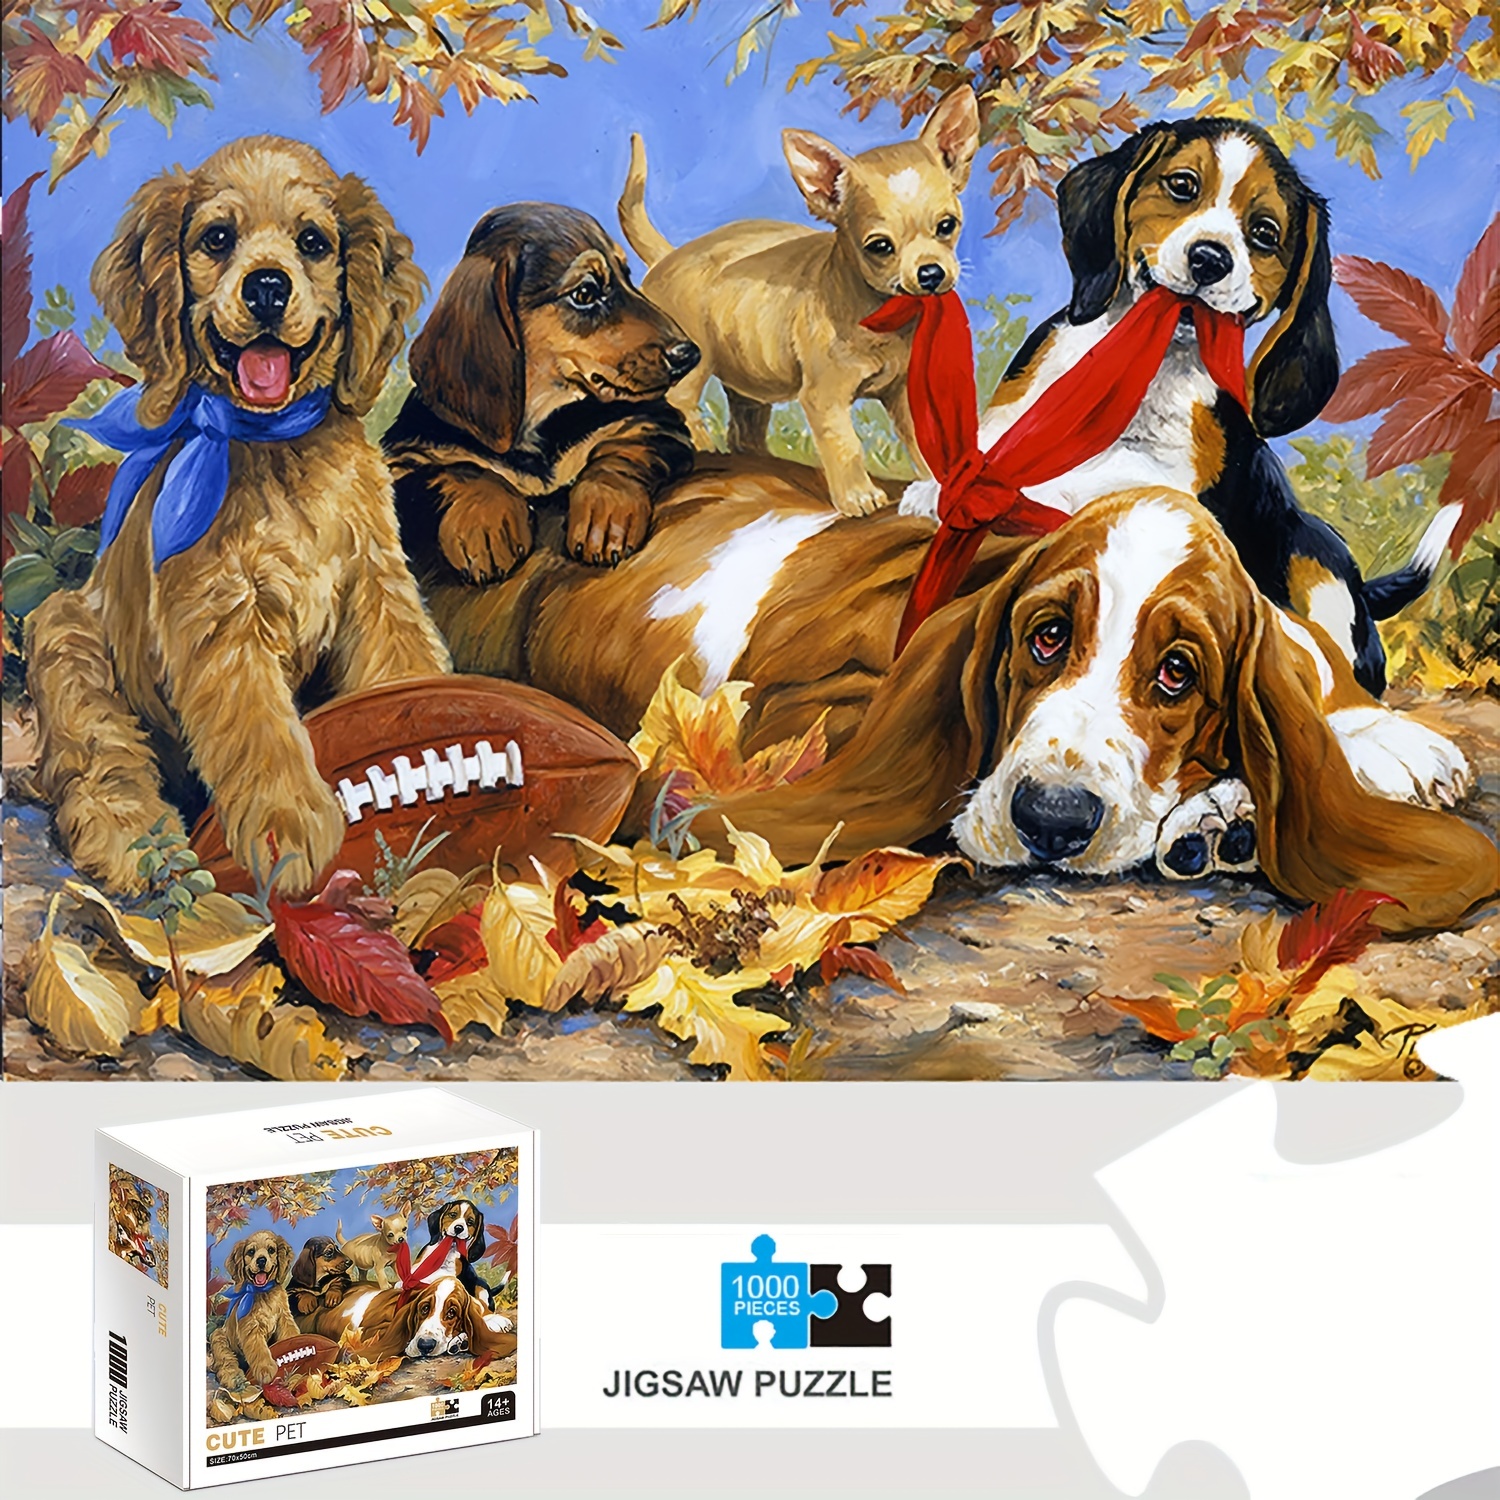 1000 Pieces Wooden Jigsaw Puzzles Funny Dogs Puzzles For Adults